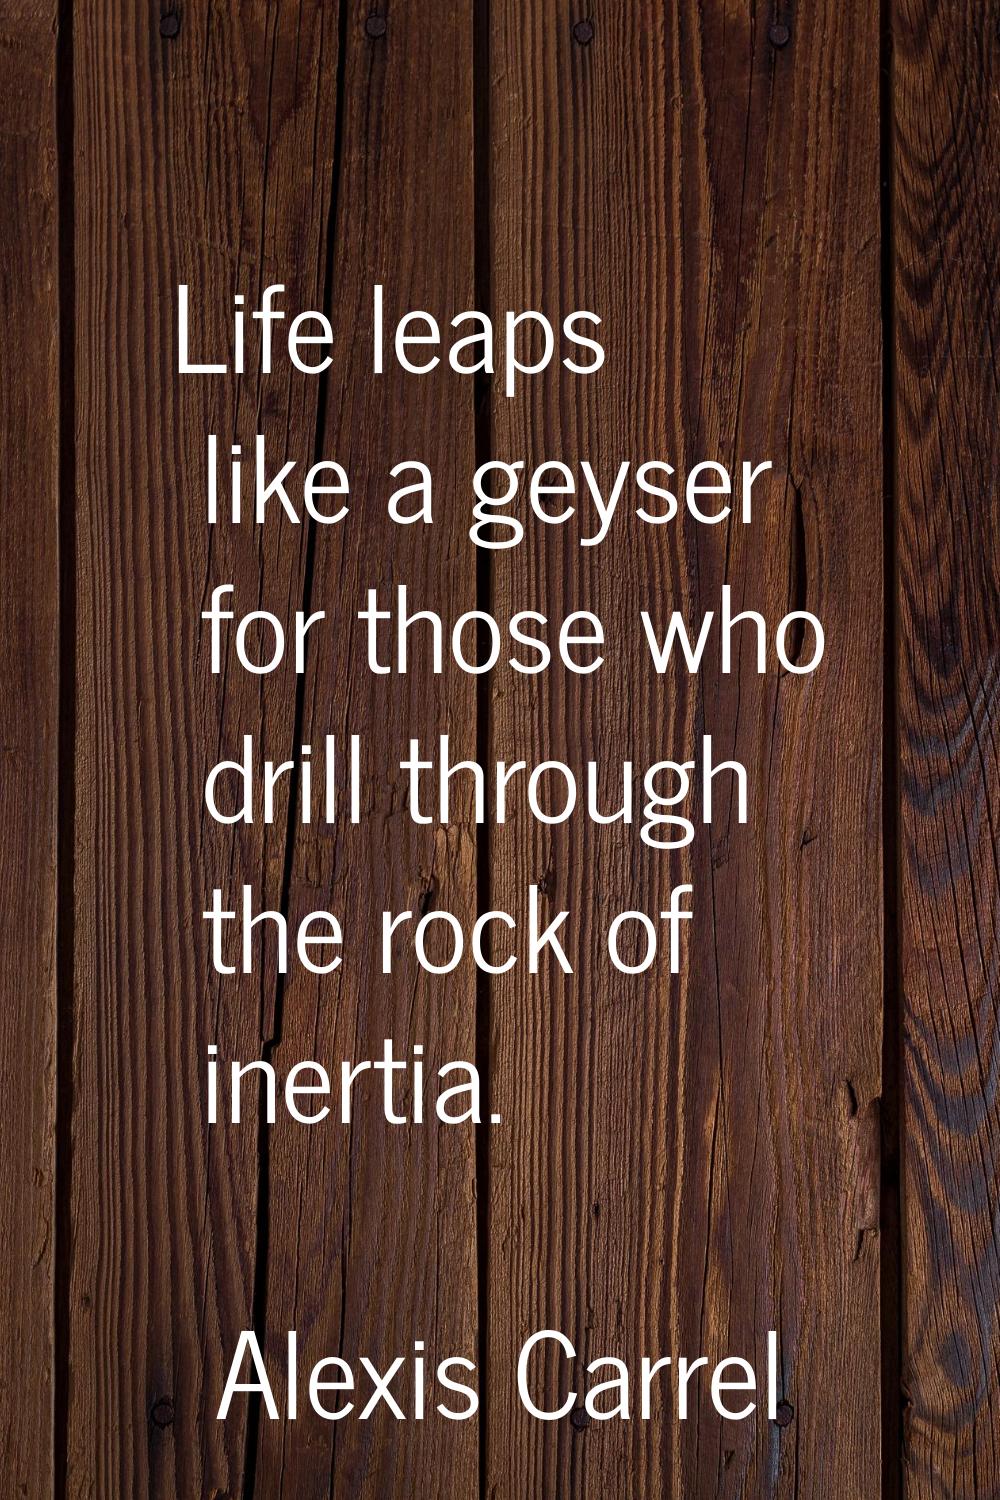 Life leaps like a geyser for those who drill through the rock of inertia.